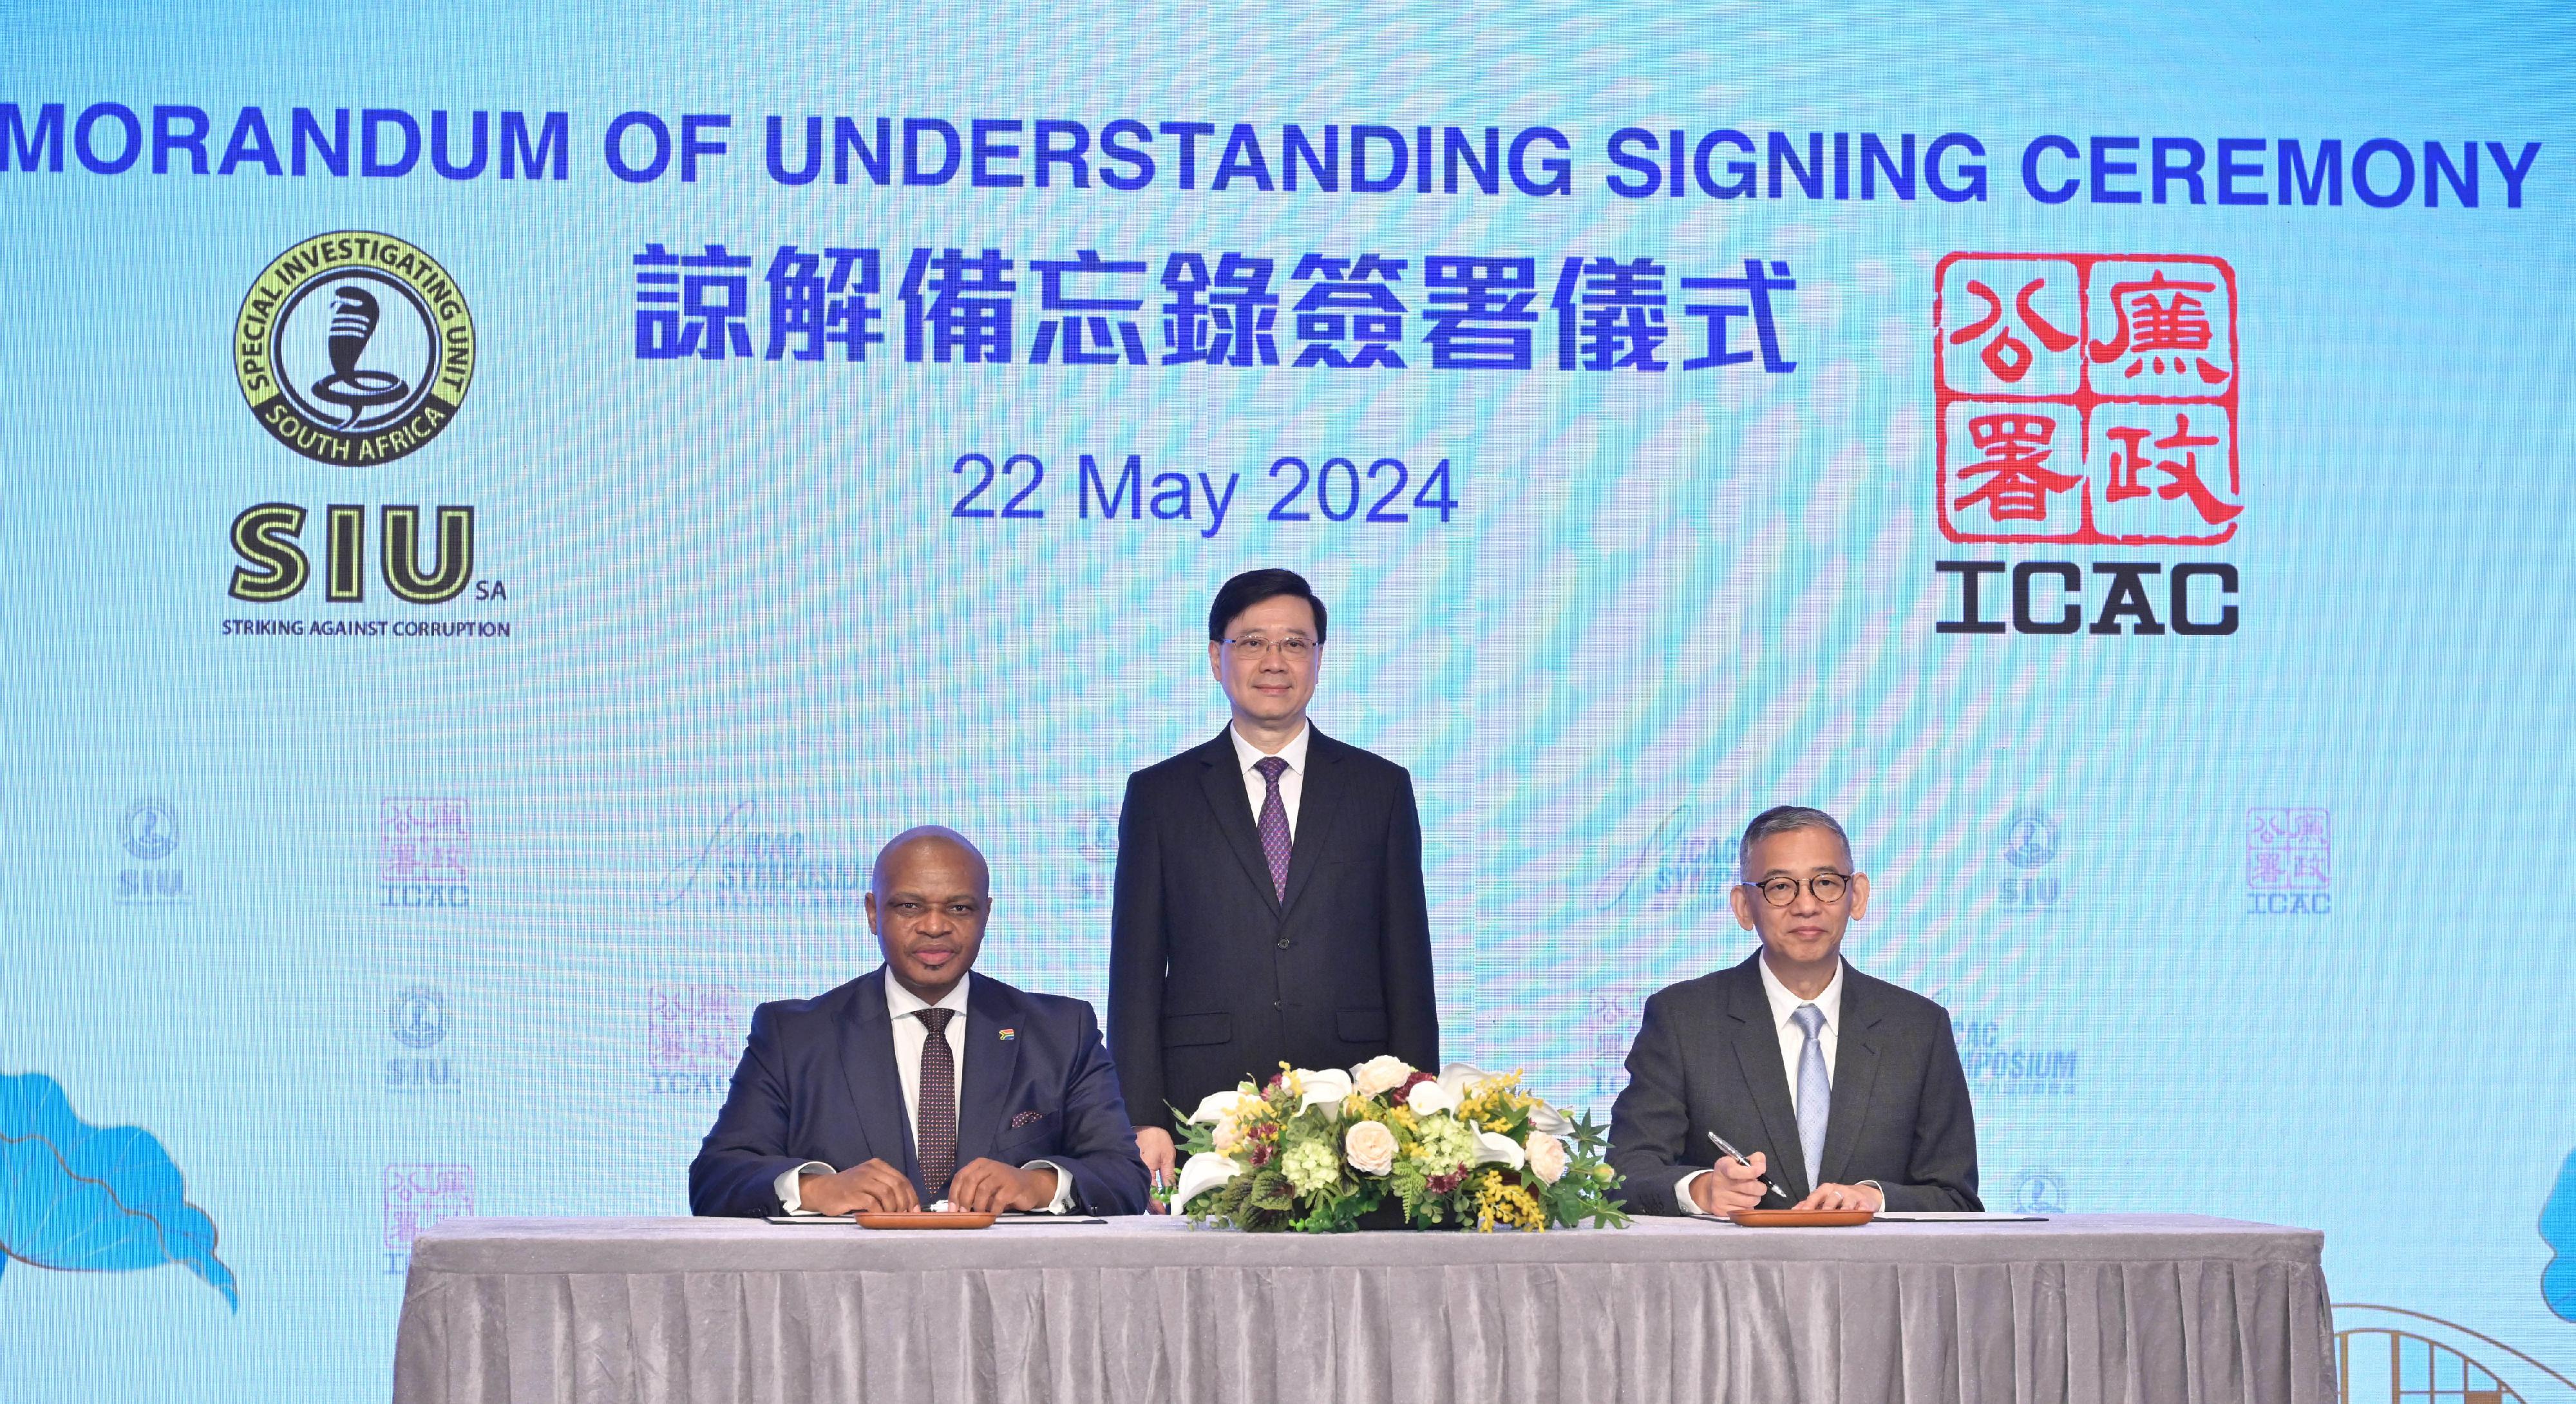 The Chief Executive, Mr John Lee, attended the 8th ICAC (Independent Commission Against Corruption) Symposium today (May 22). Photo shows Mr Lee (centre) witnessing the ICAC Commissioner, Mr Woo Ying-ming (right) and the Head of the Special Investigating Unit of South Africa, Andy JL Mothibi (left), signing a Memorandum of Understanding.